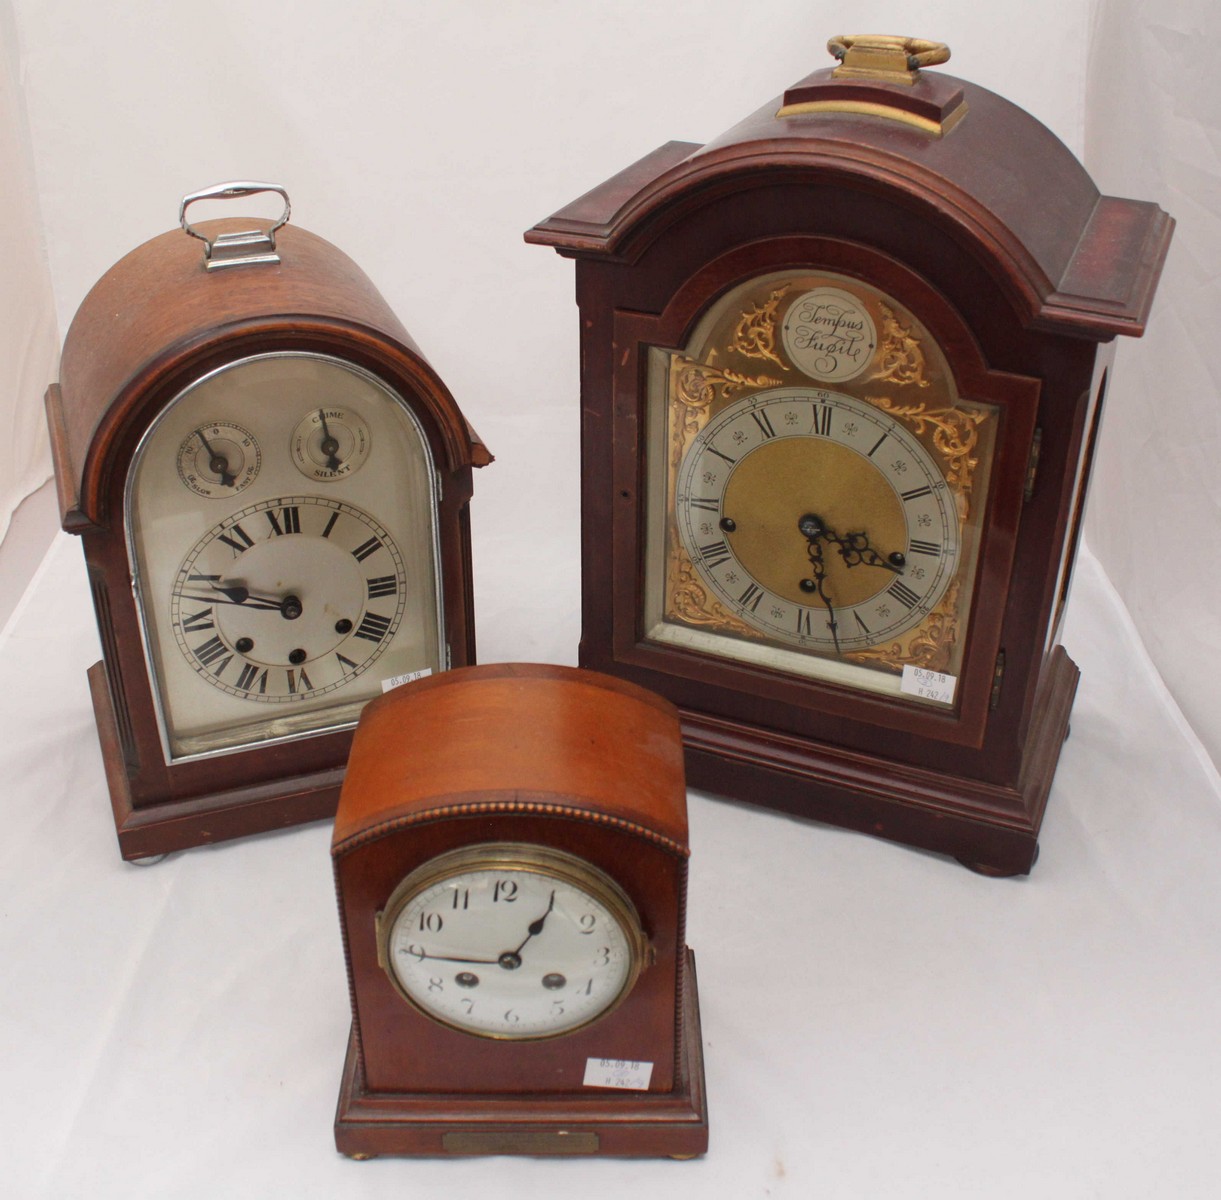 A mahogany cased bracket clock with arched top marked 'Tempus Fugit', silvered dial with Roman